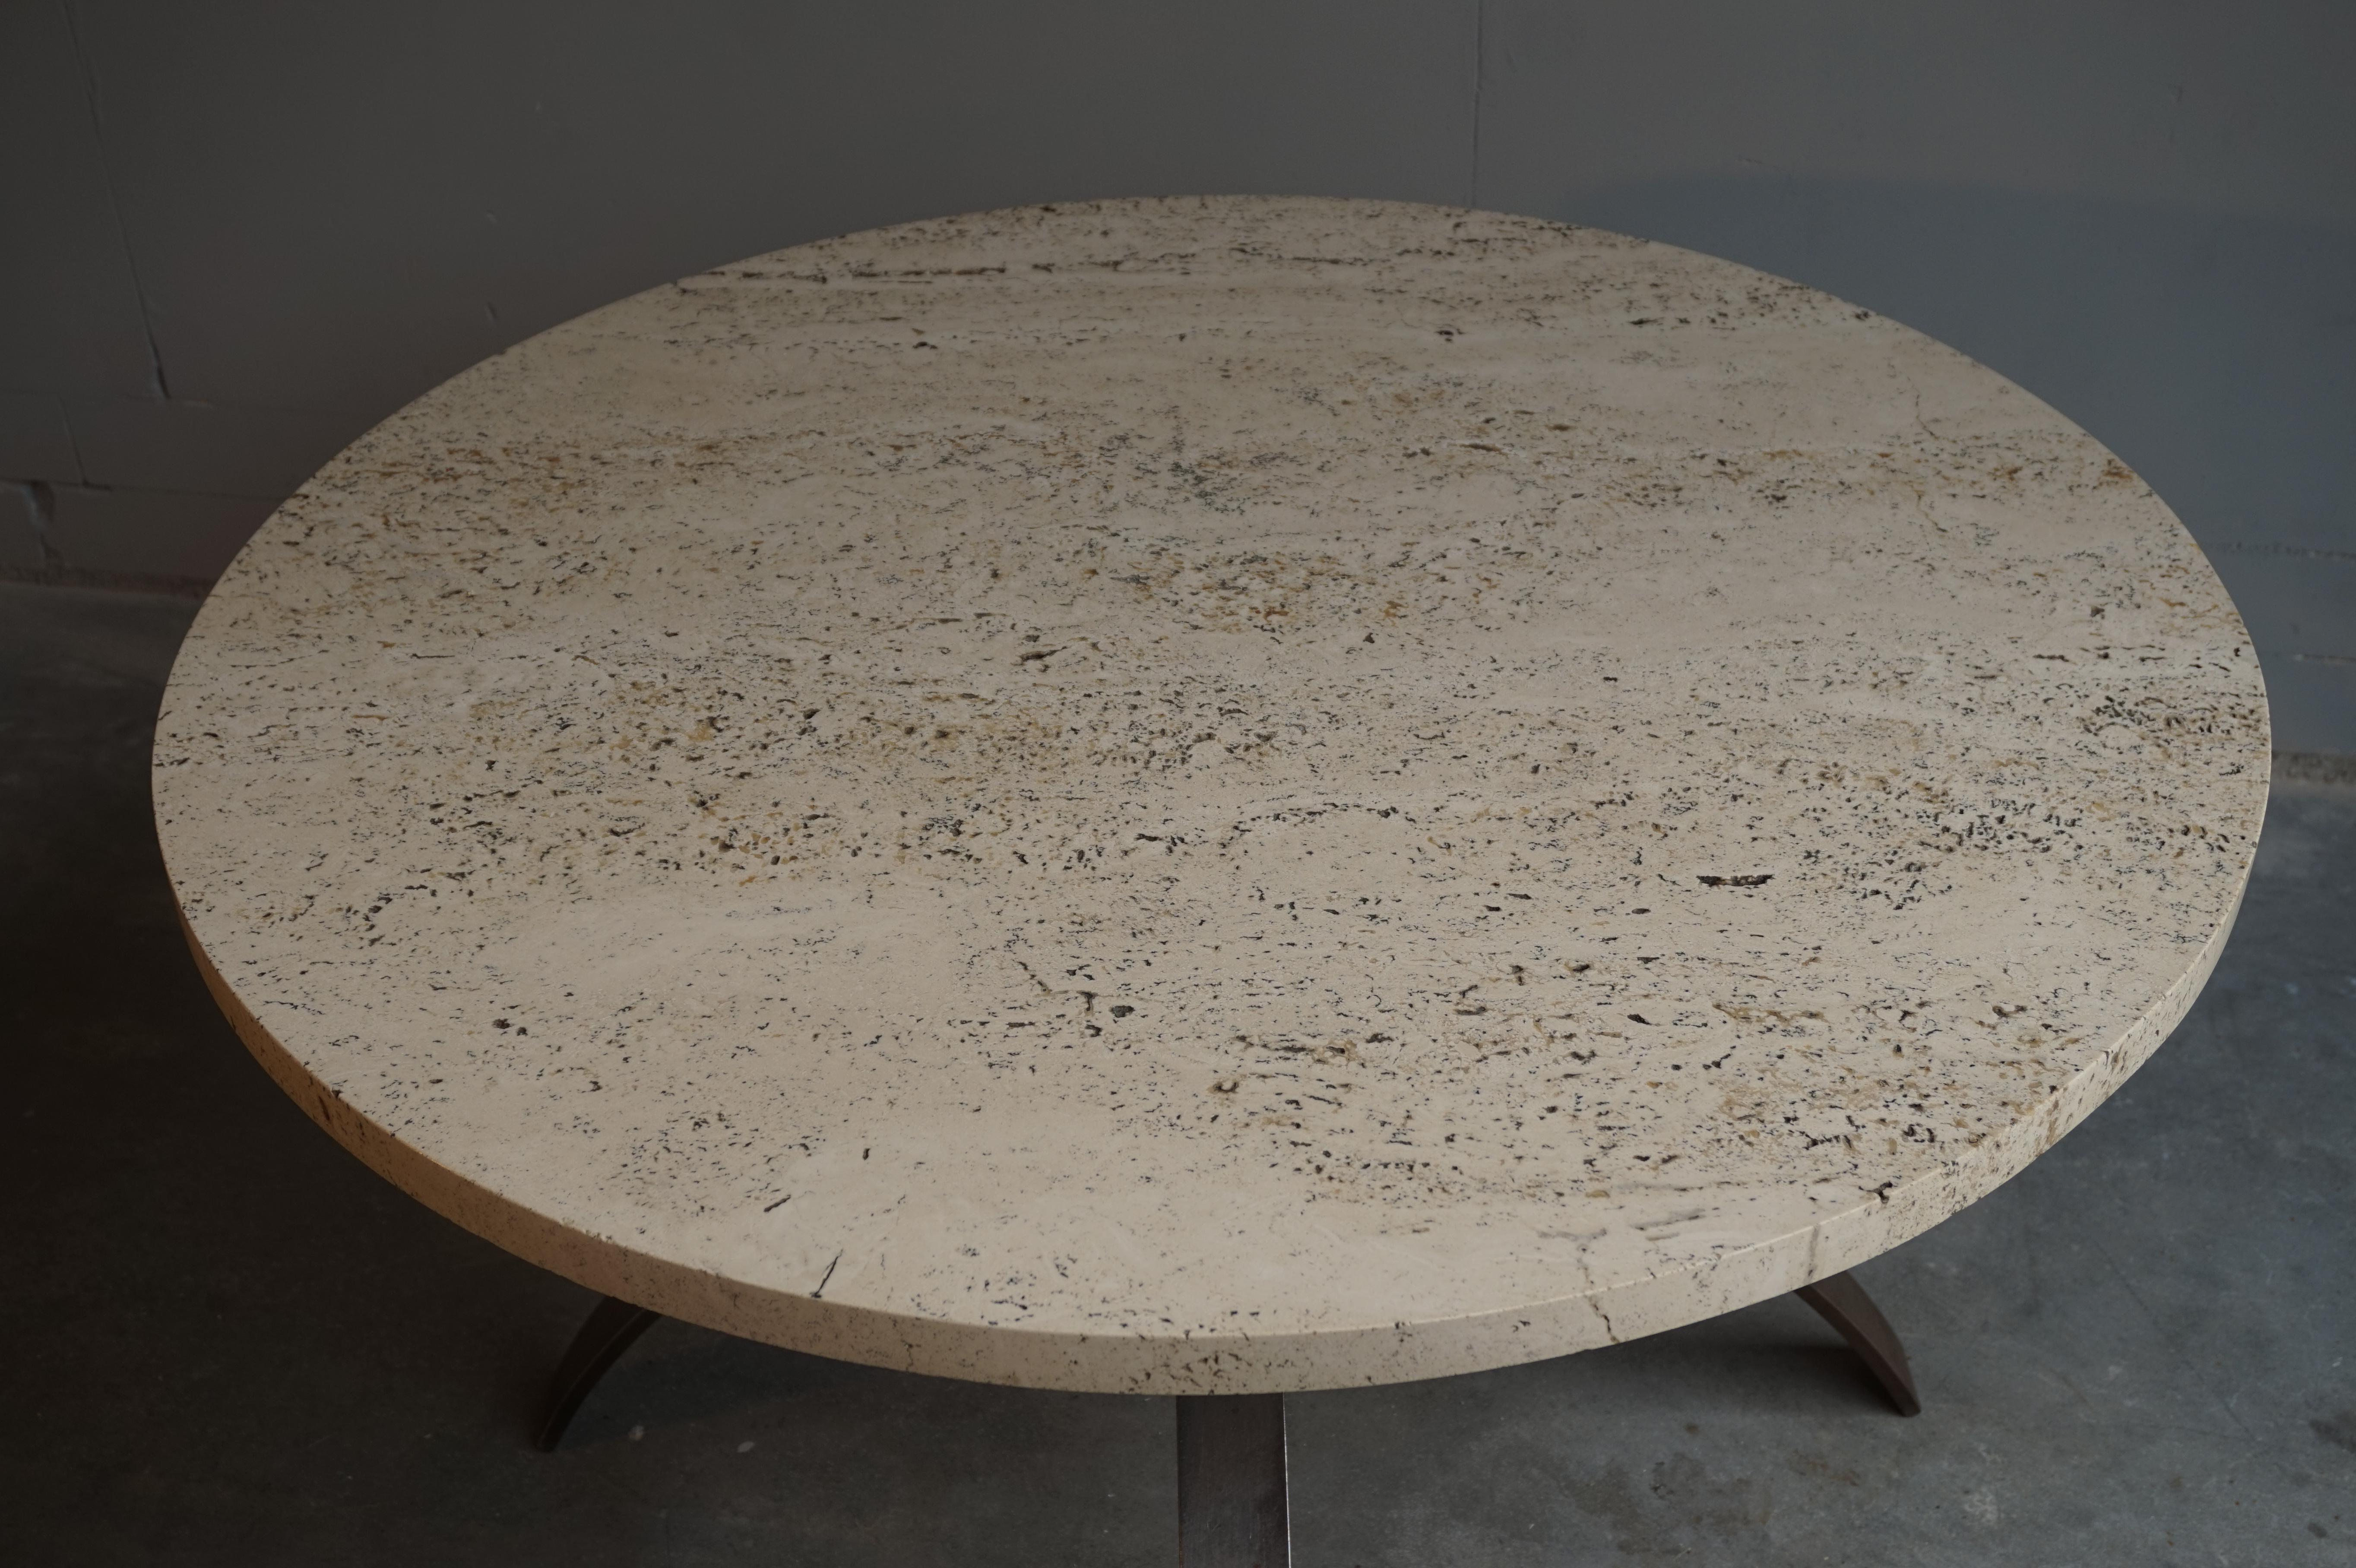 Timeless Midcentury Modern Wrought Iron and Travertine Coffee Table 1960s Design For Sale 3